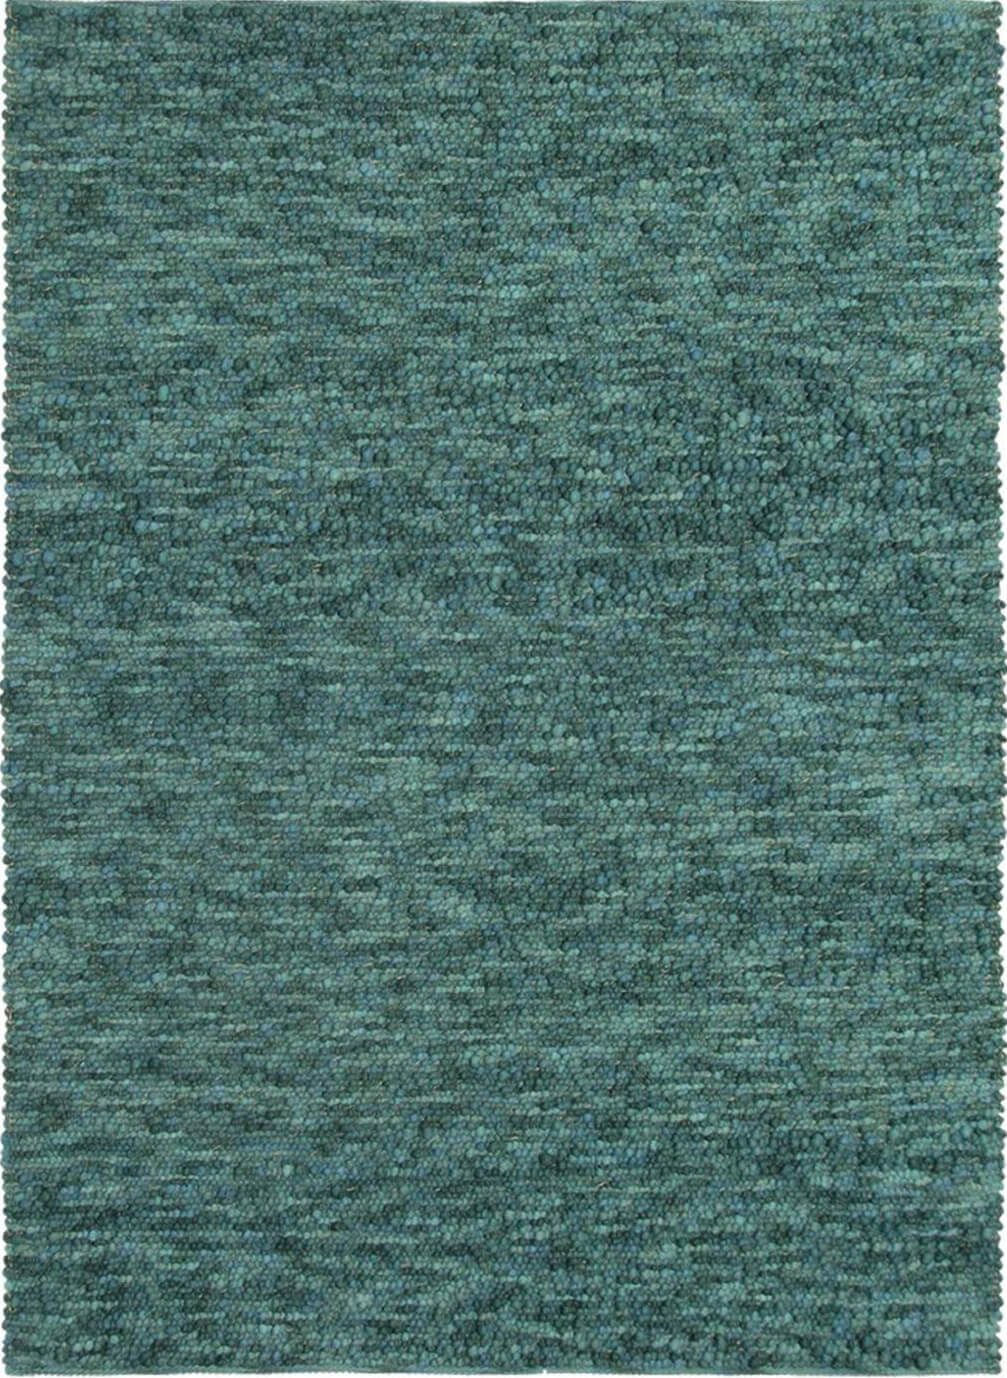 Stubble 29707 Rug by Brink & Campman